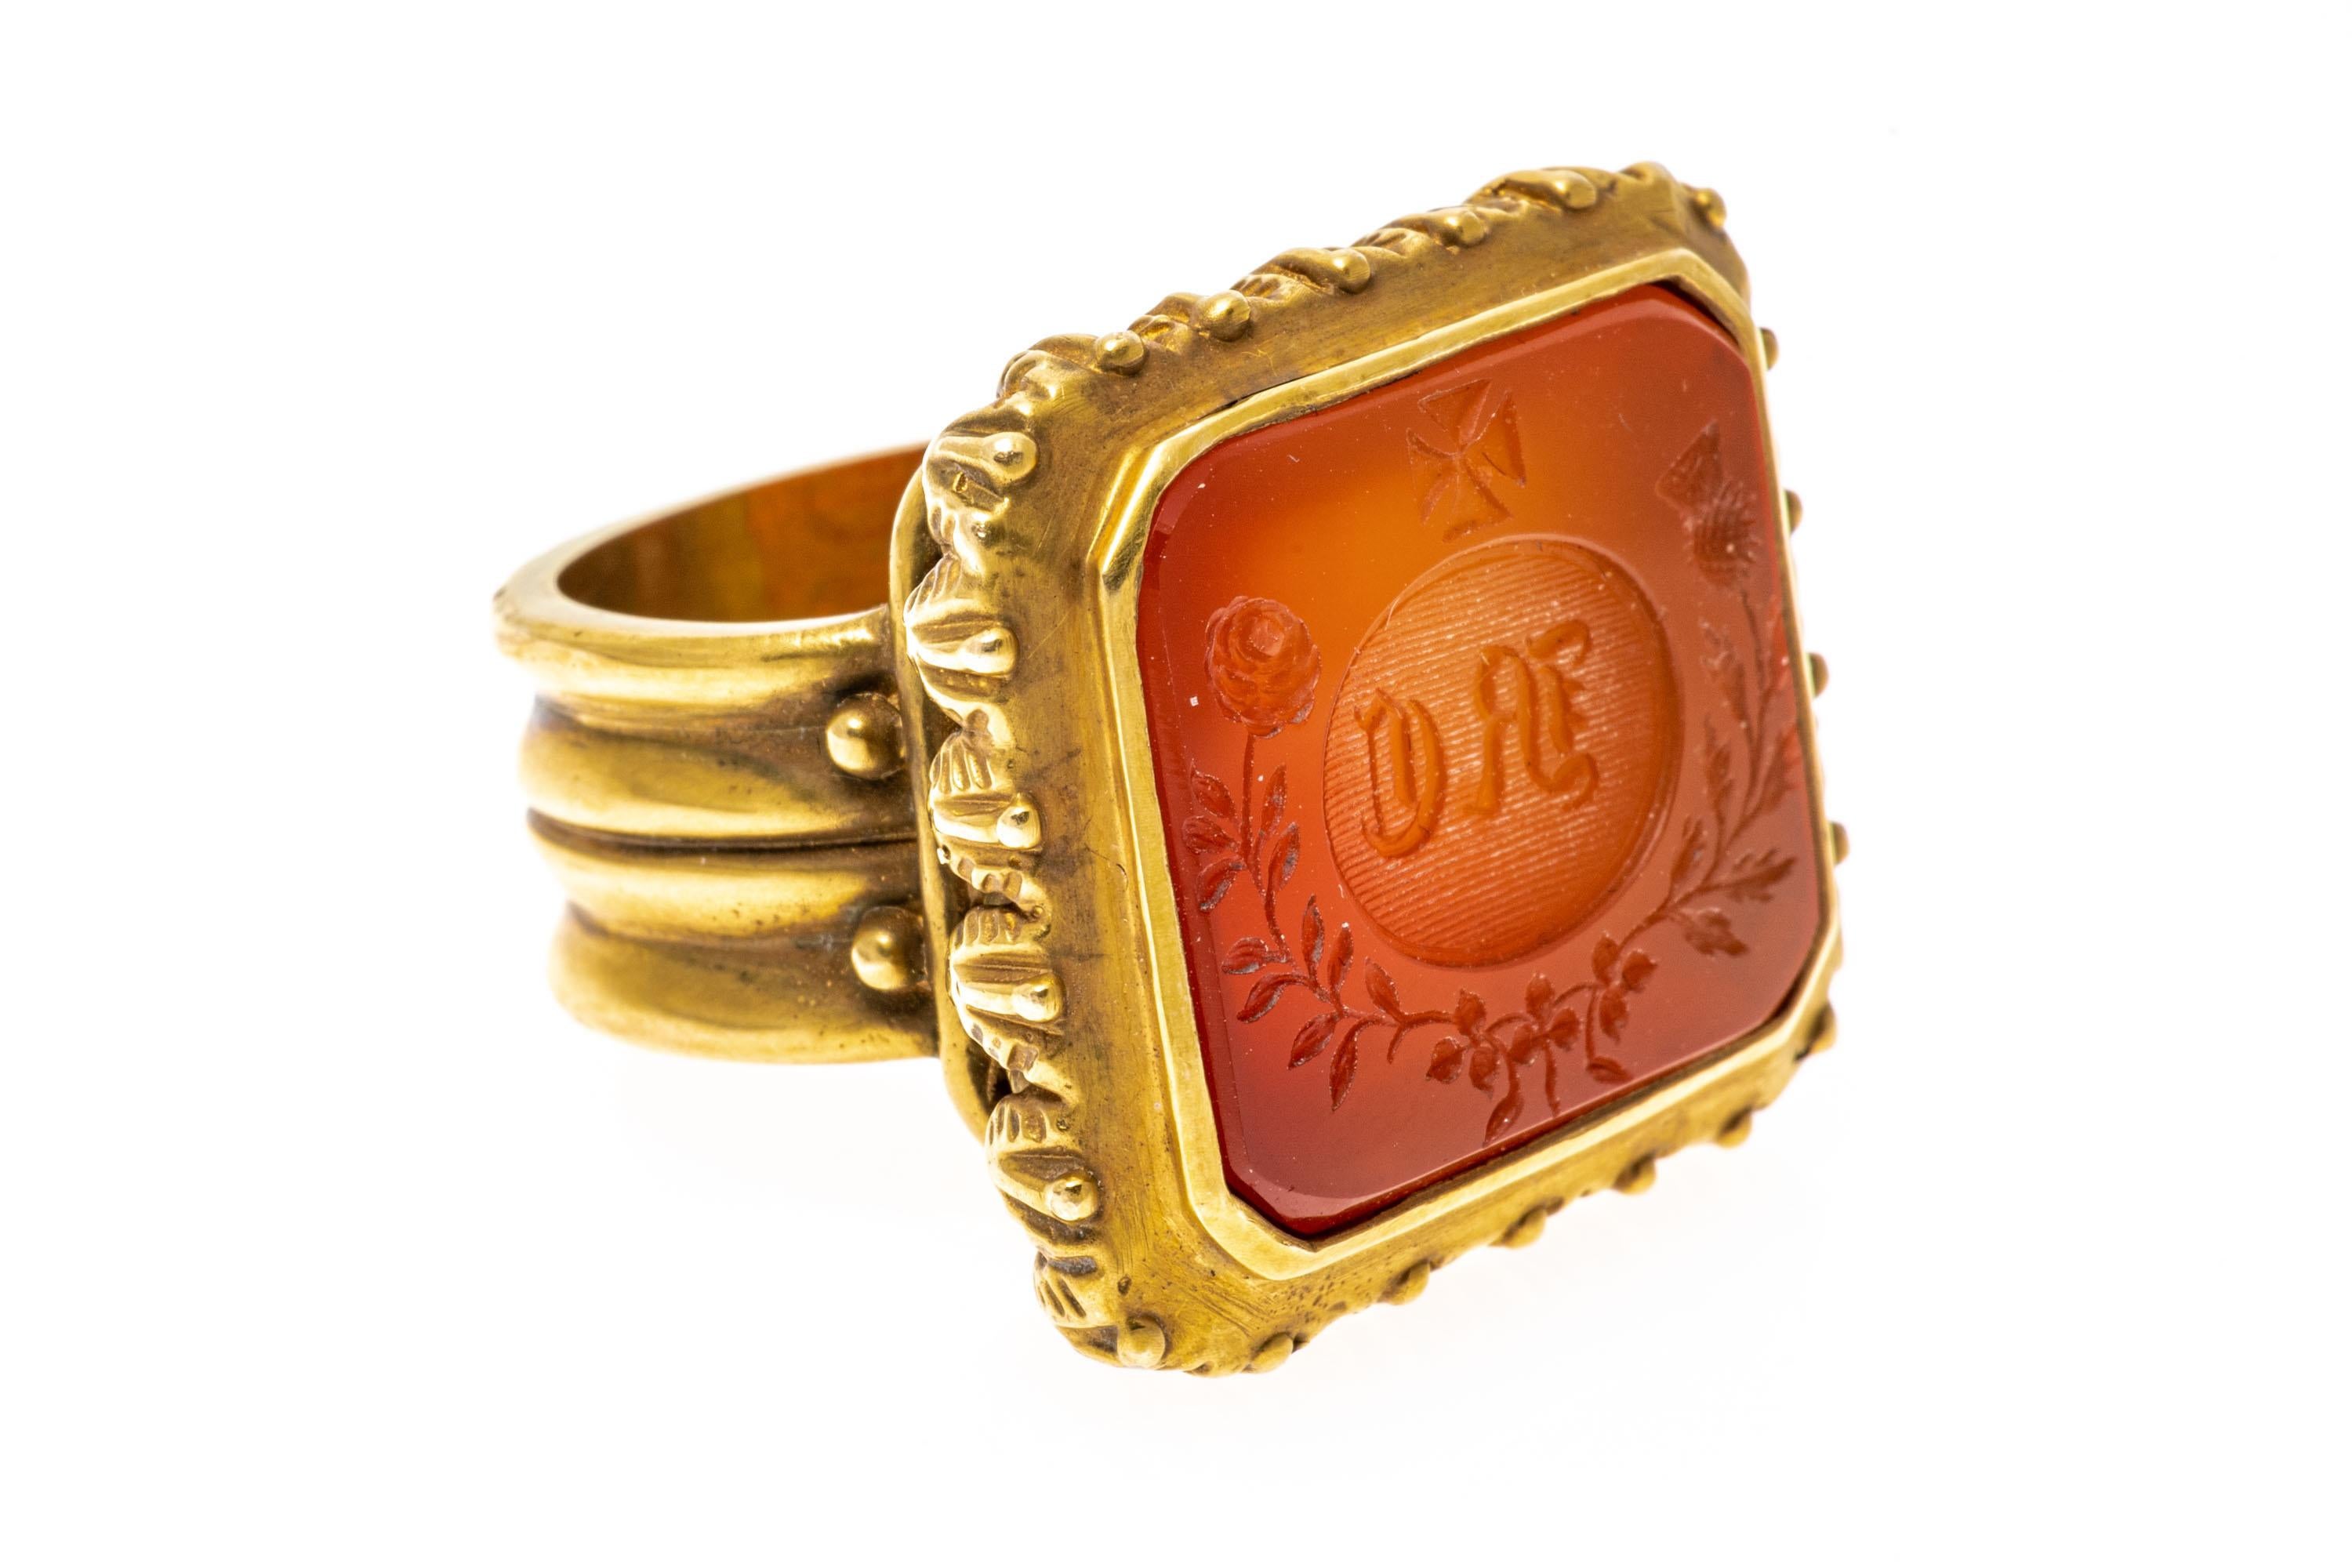 14k yellow gold ring. This amazing chunky contemporary rectangular wax seal stamp ring features a carnelian intaglio, engraved with old English initials, a Maltese cross, a rose and a thistle. The ring is also adorned with a decorative foliate